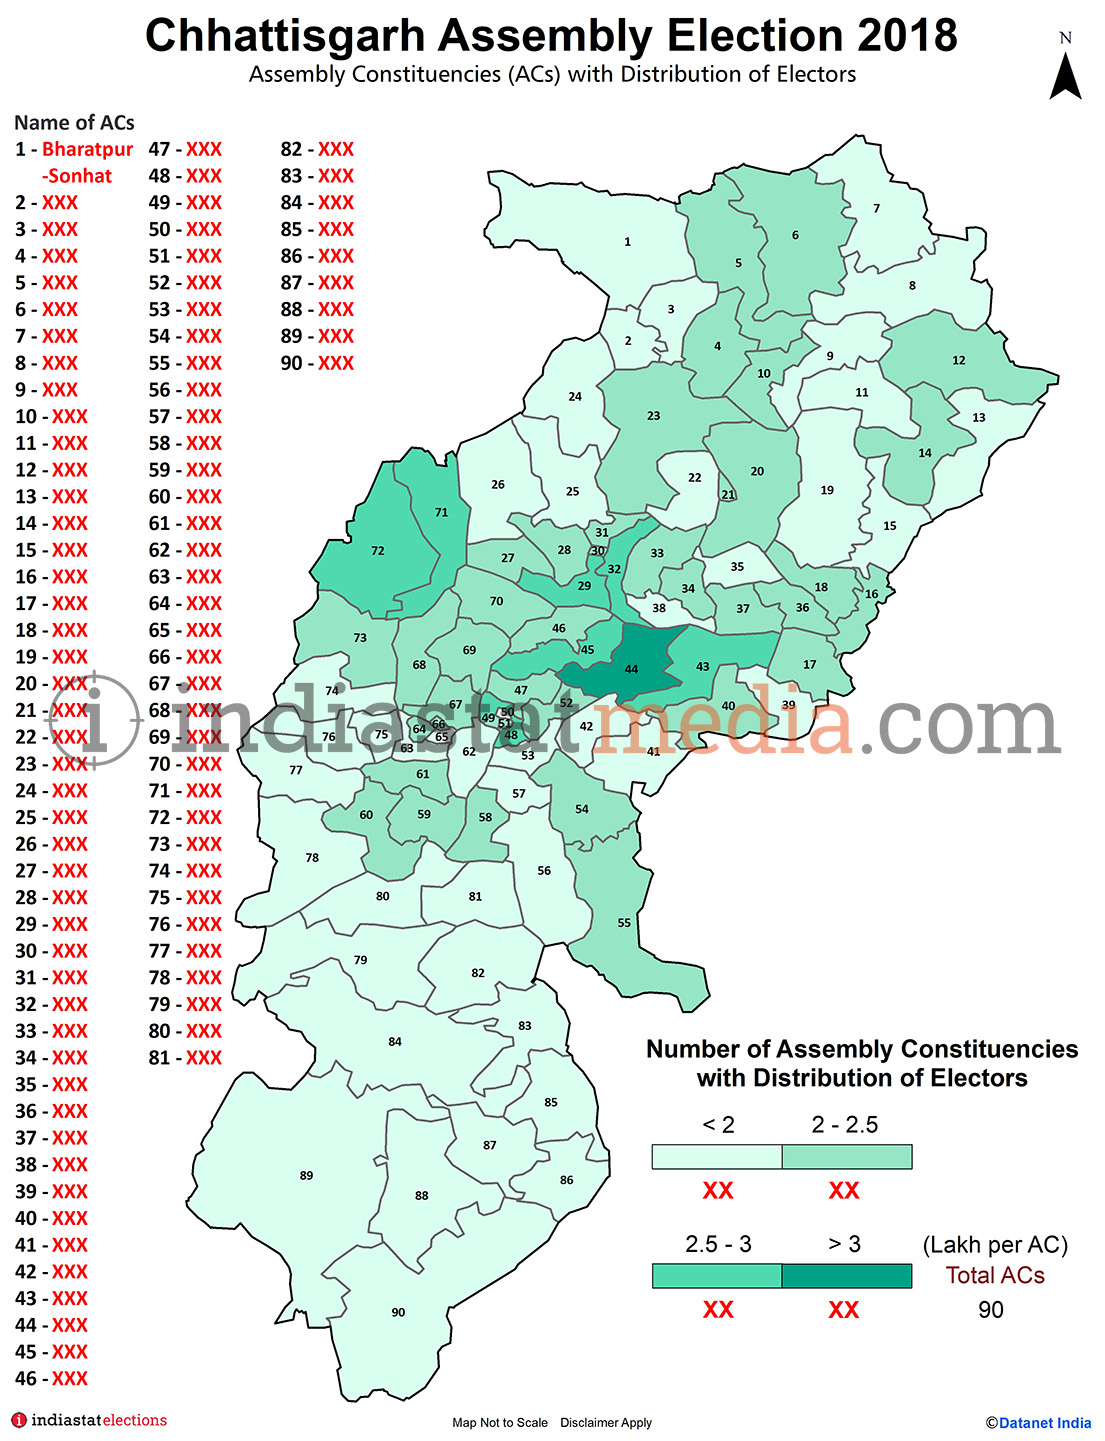 Assembly Constituencies (ACs) with Distribution of Electors in Chhattisgarh (Assembly Election - 2018)